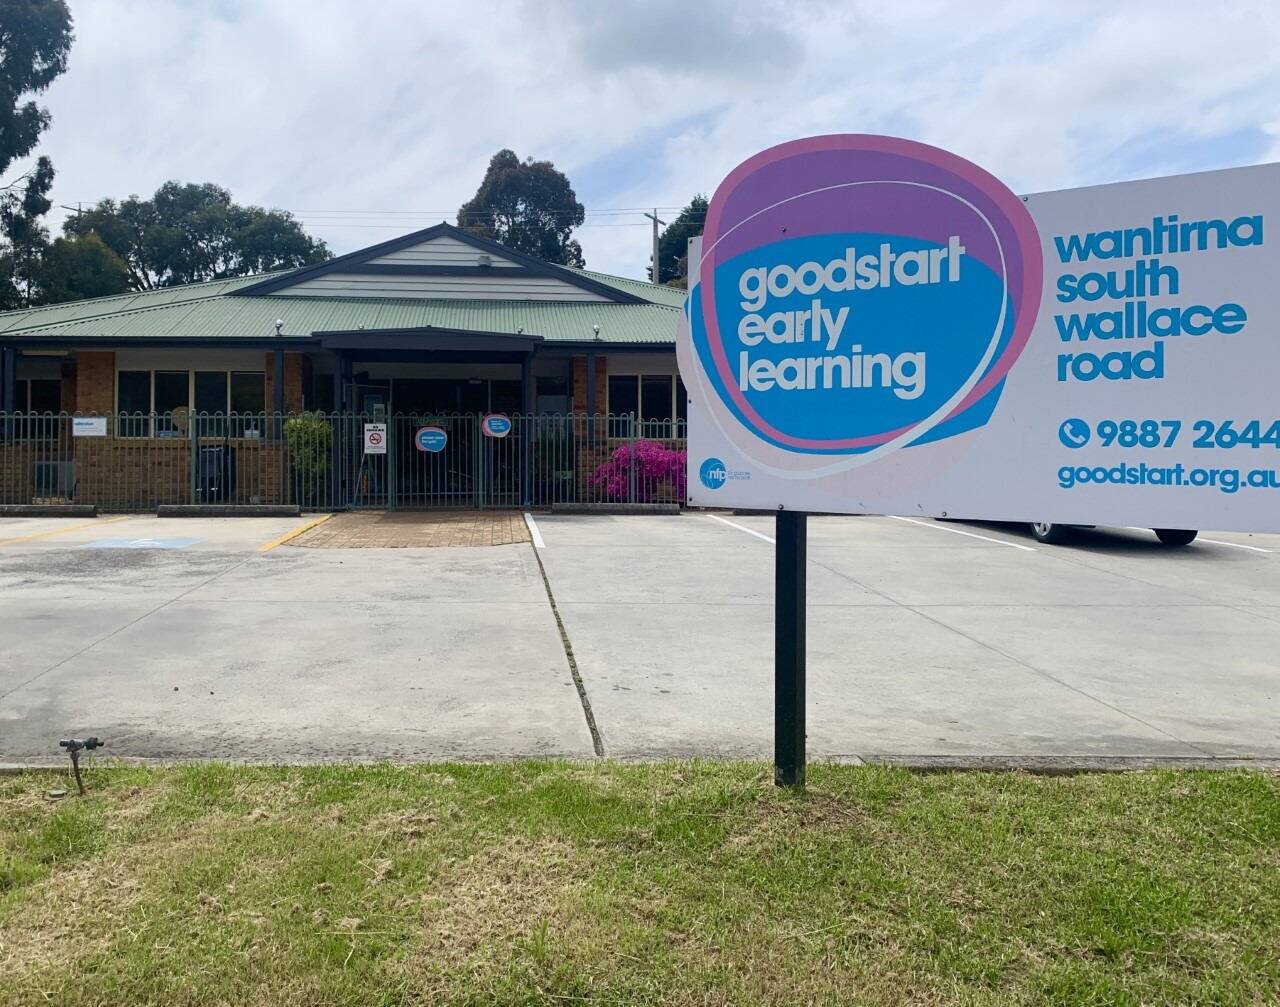 Goodstart Early Learning Wantirna South - Wallace Road